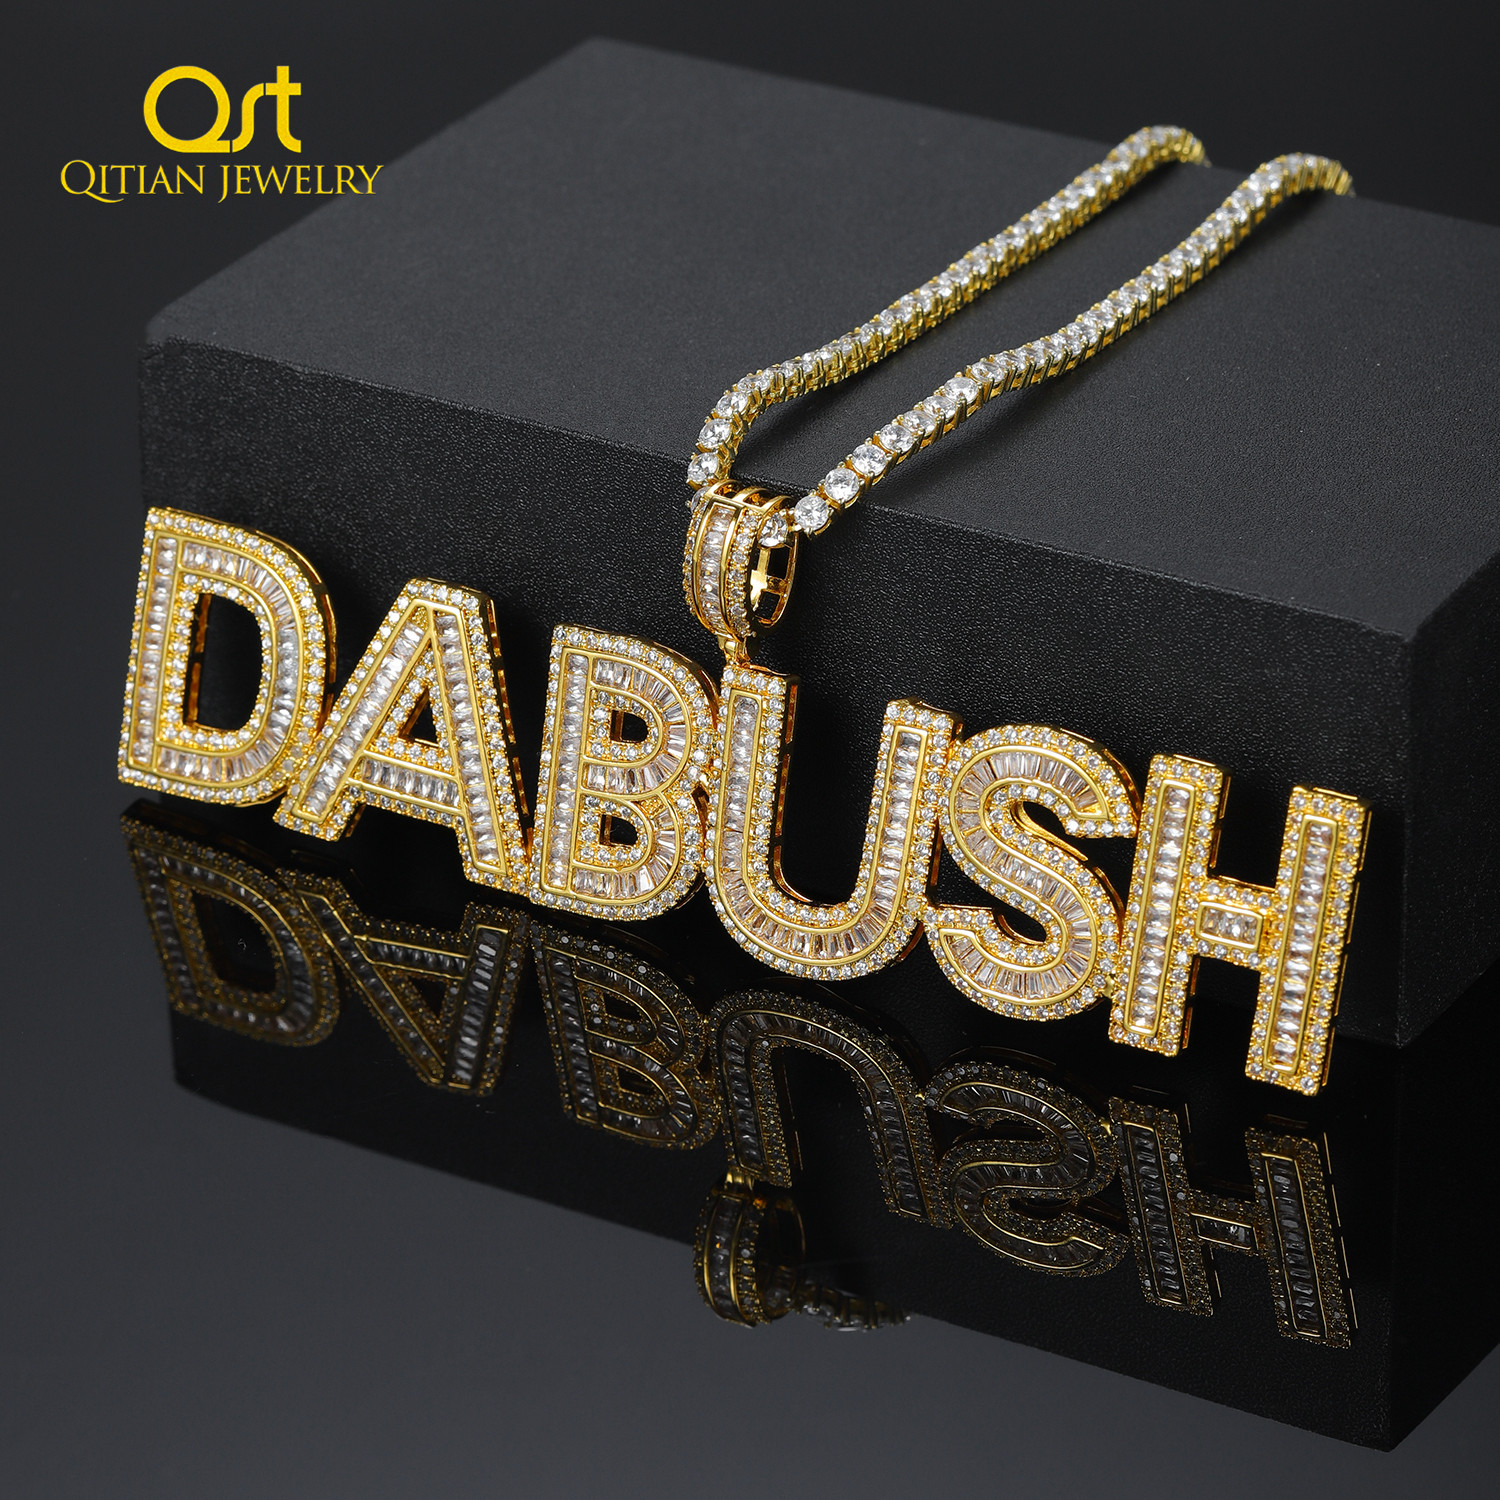 Customized Name Cubic Zircon Baguette Letters Hip Hop Pendant Necklaces Gold Silver Men's Jewelry with Tennis Chain for Gifts